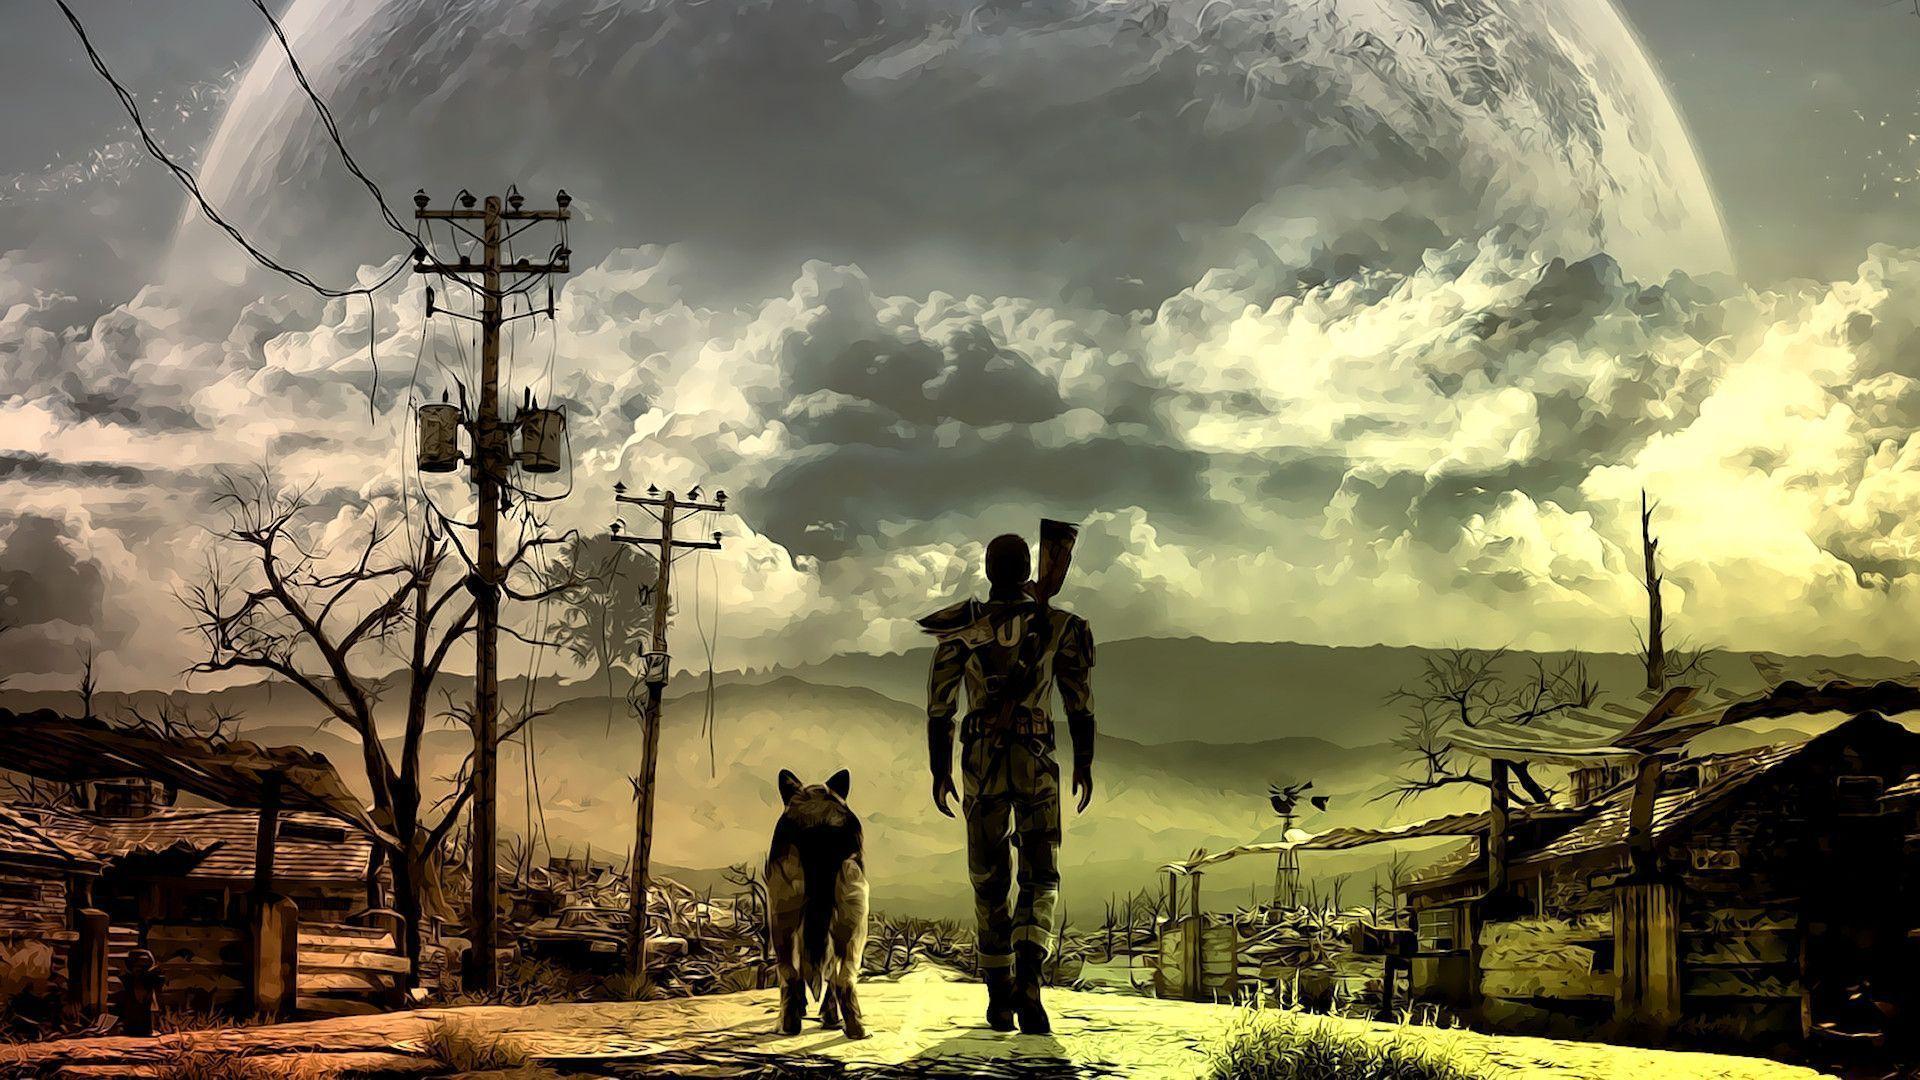 Fallout Wallpapers - Top Free Fallout